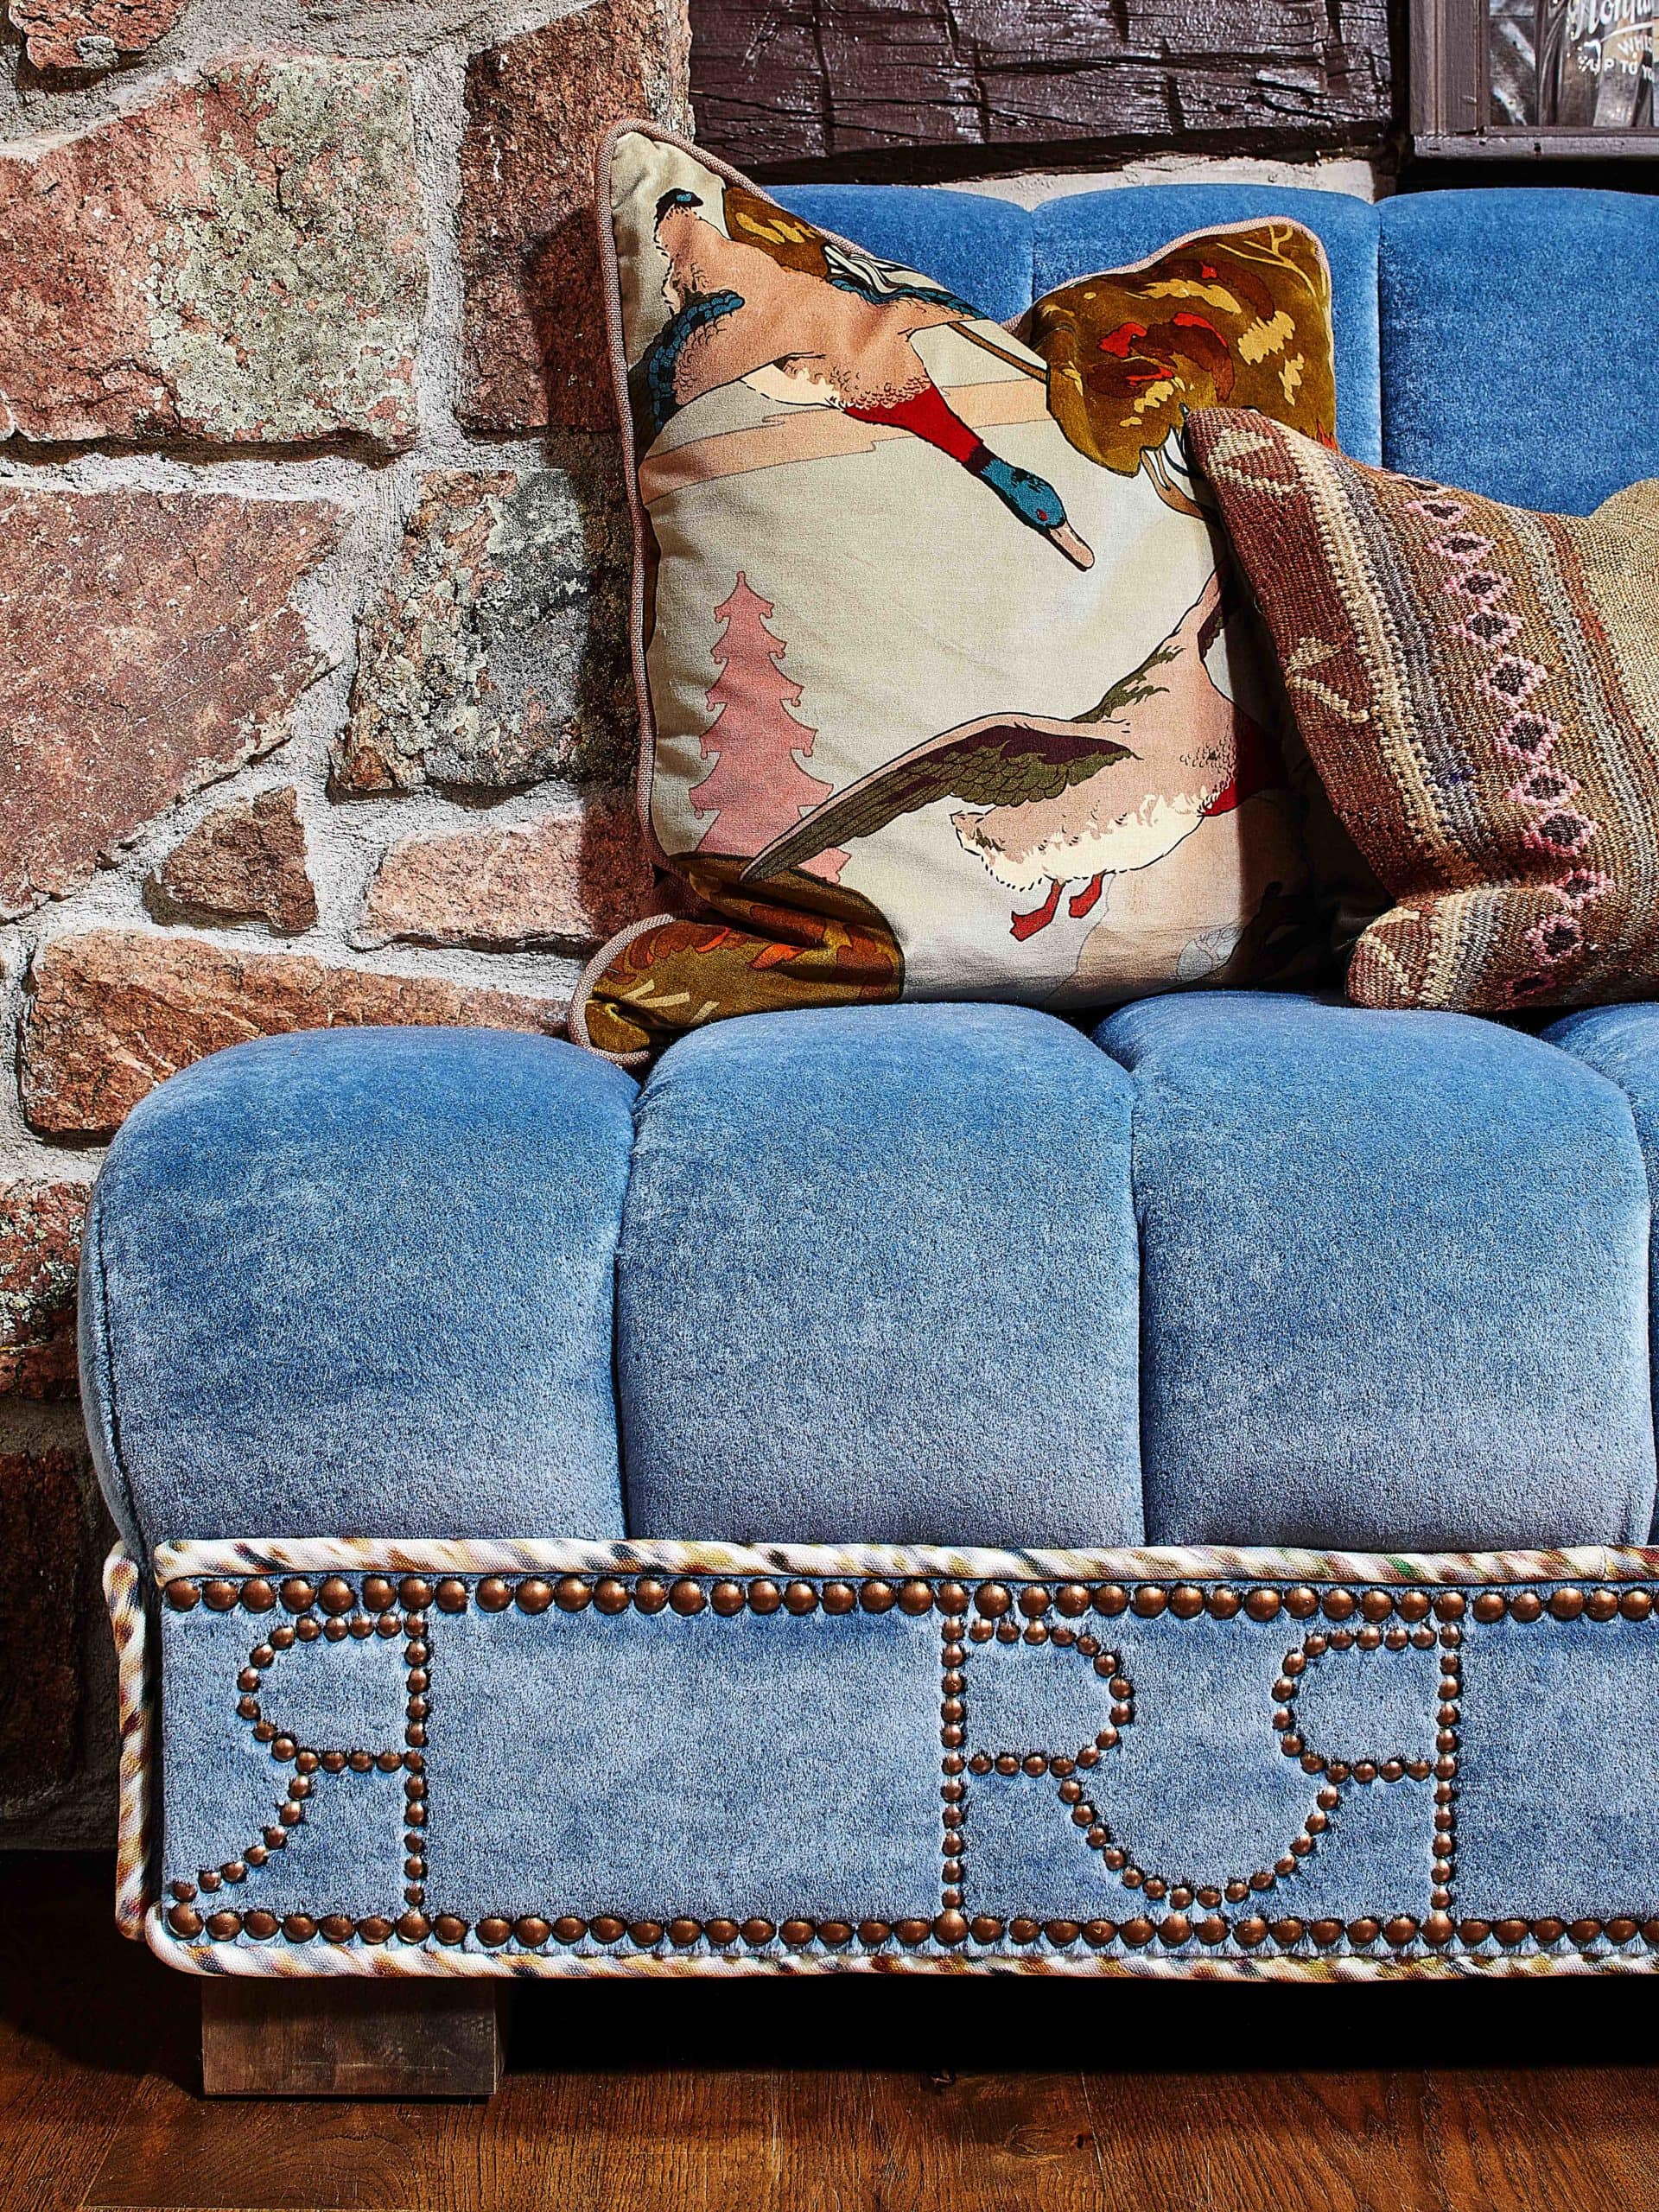 Custom upholstered sofas with Remount Ranch nail head designs and patterned throw pillows